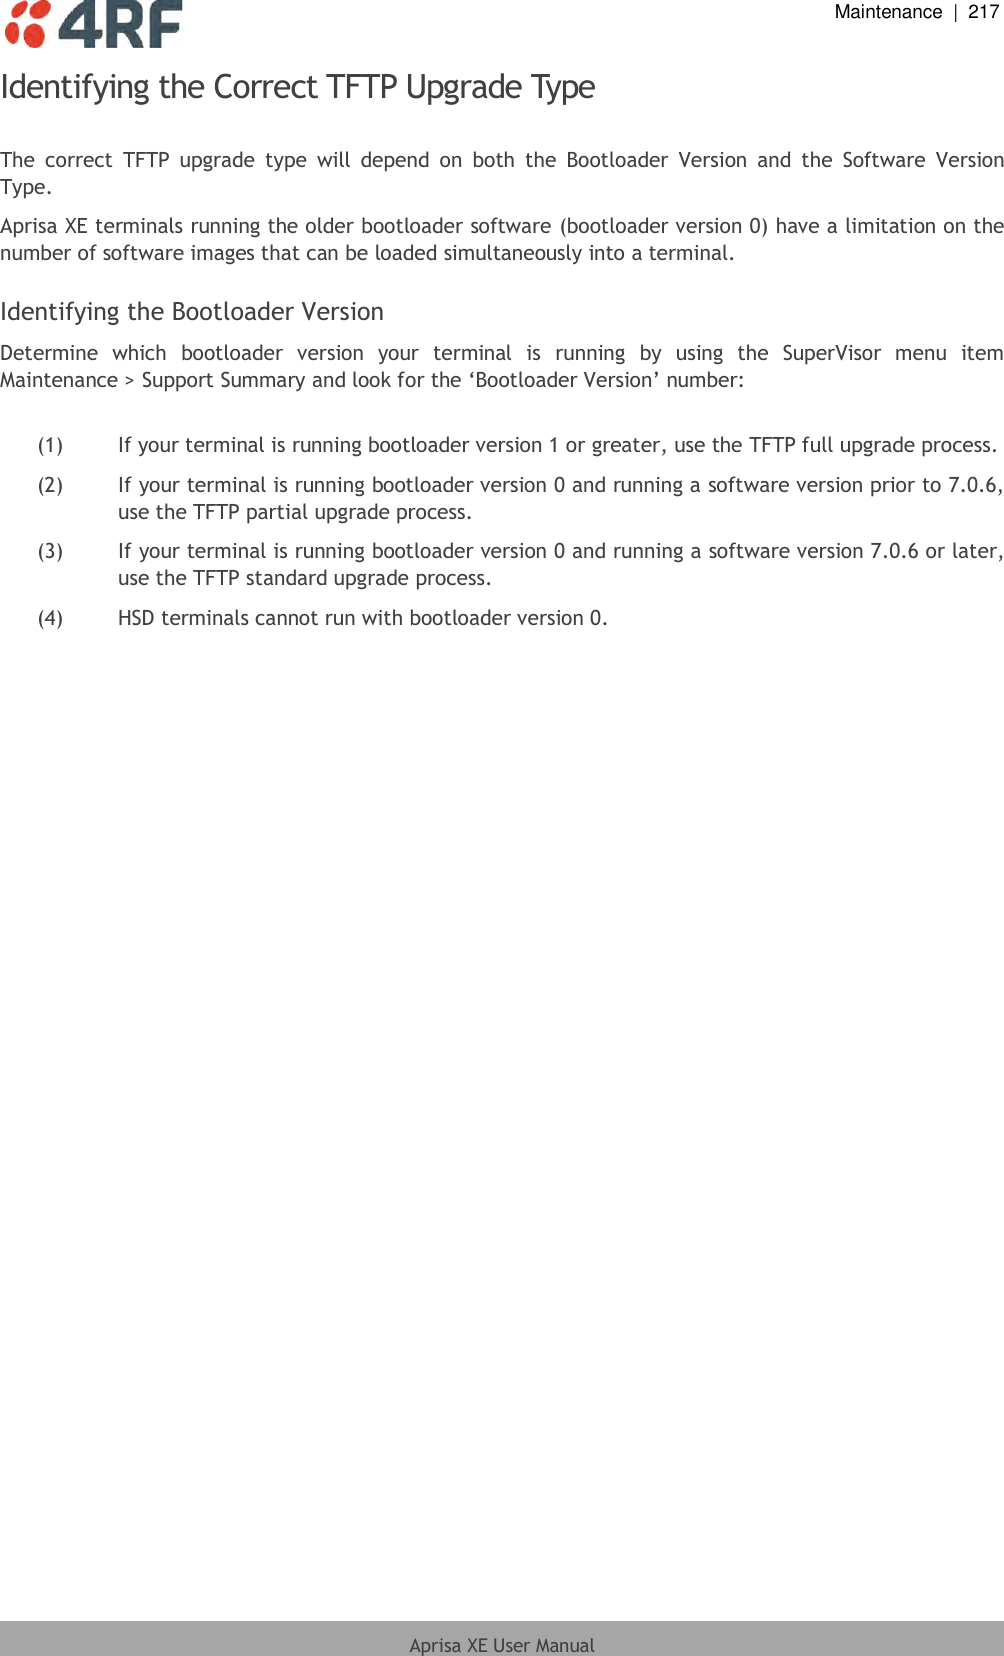  Maintenance  |  217  Aprisa XE User Manual  Identifying the Correct TFTP Upgrade Type  The  correct  TFTP  upgrade  type  will  depend  on  both  the  Bootloader  Version  and  the  Software  Version Type. Aprisa XE terminals running the older bootloader software (bootloader version 0) have a limitation on the number of software images that can be loaded simultaneously into a terminal.  Identifying the Bootloader Version Determine  which  bootloader  version  your  terminal  is  running  by  using  the  SuperVisor  menu  item Maintenance &gt; Support Summary and look for the ‘Bootloader Version’ number:  (1)  If your terminal is running bootloader version 1 or greater, use the TFTP full upgrade process. (2)  If your terminal is running bootloader version 0 and running a software version prior to 7.0.6, use the TFTP partial upgrade process. (3)  If your terminal is running bootloader version 0 and running a software version 7.0.6 or later, use the TFTP standard upgrade process. (4)  HSD terminals cannot run with bootloader version 0.  